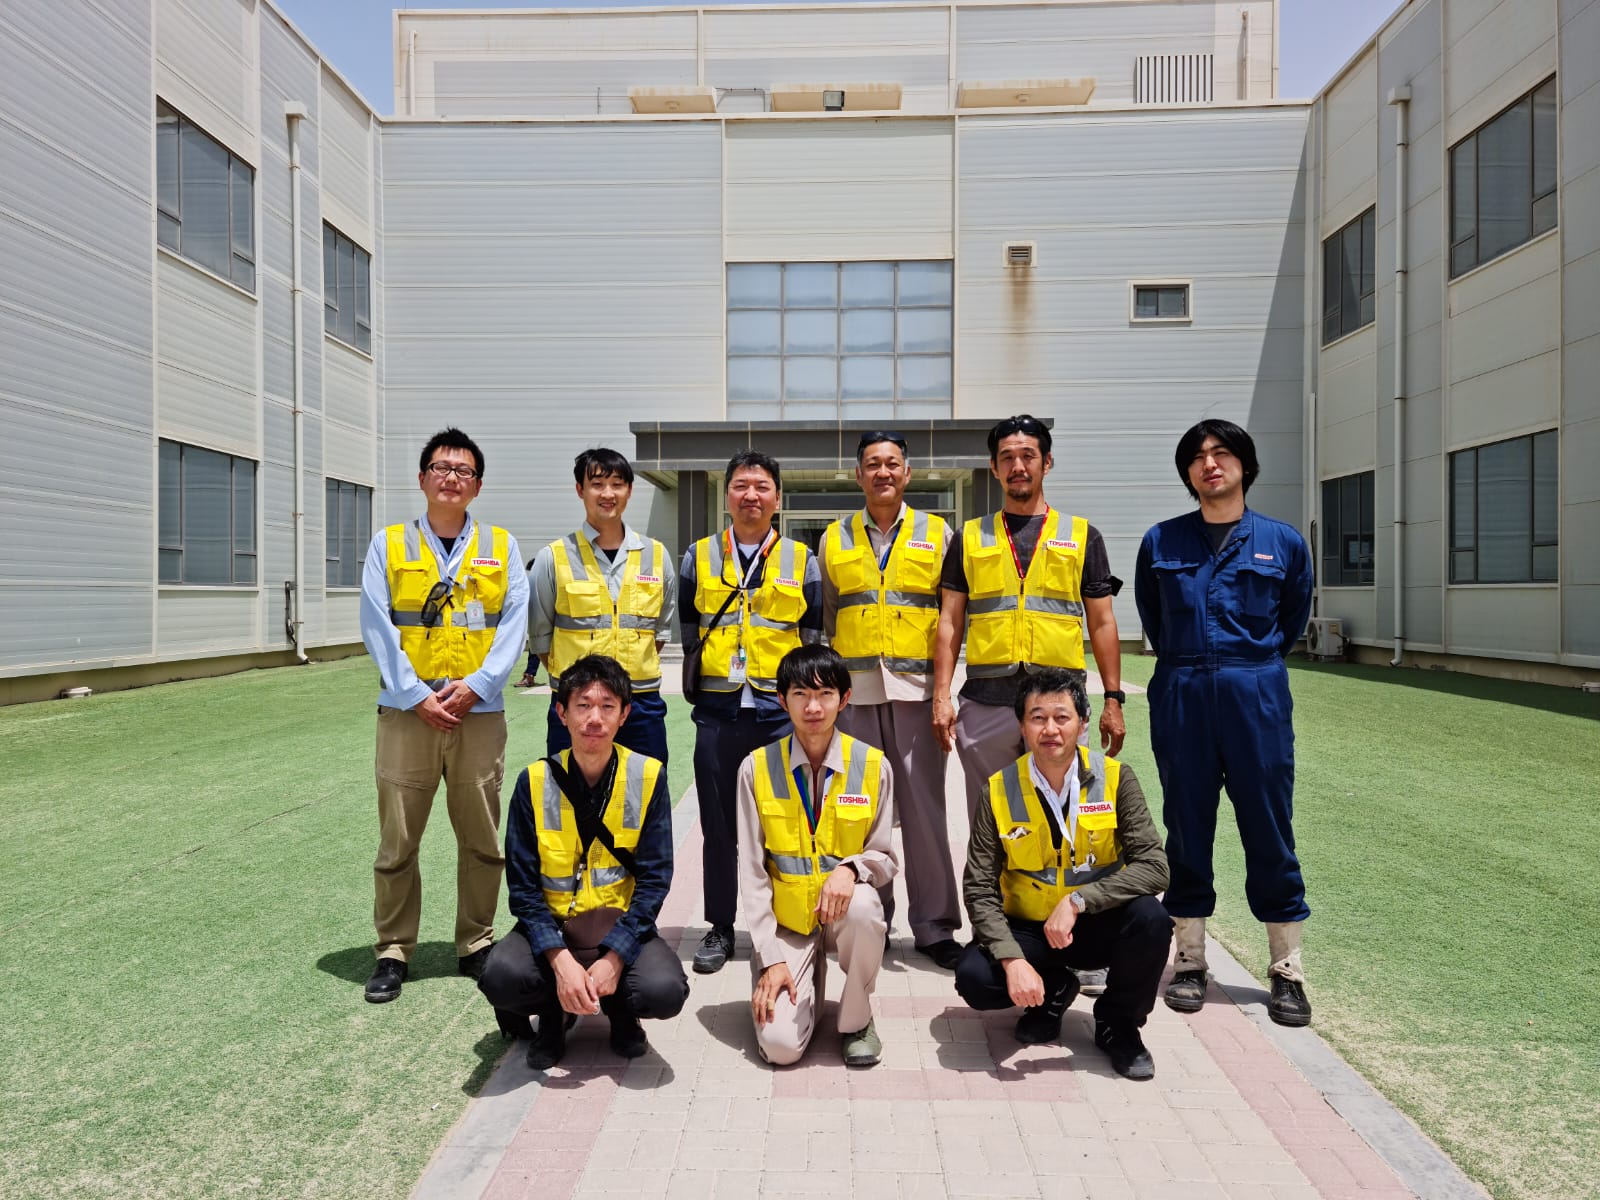 Group photograph during an inspection at a nuclear power plant overseas